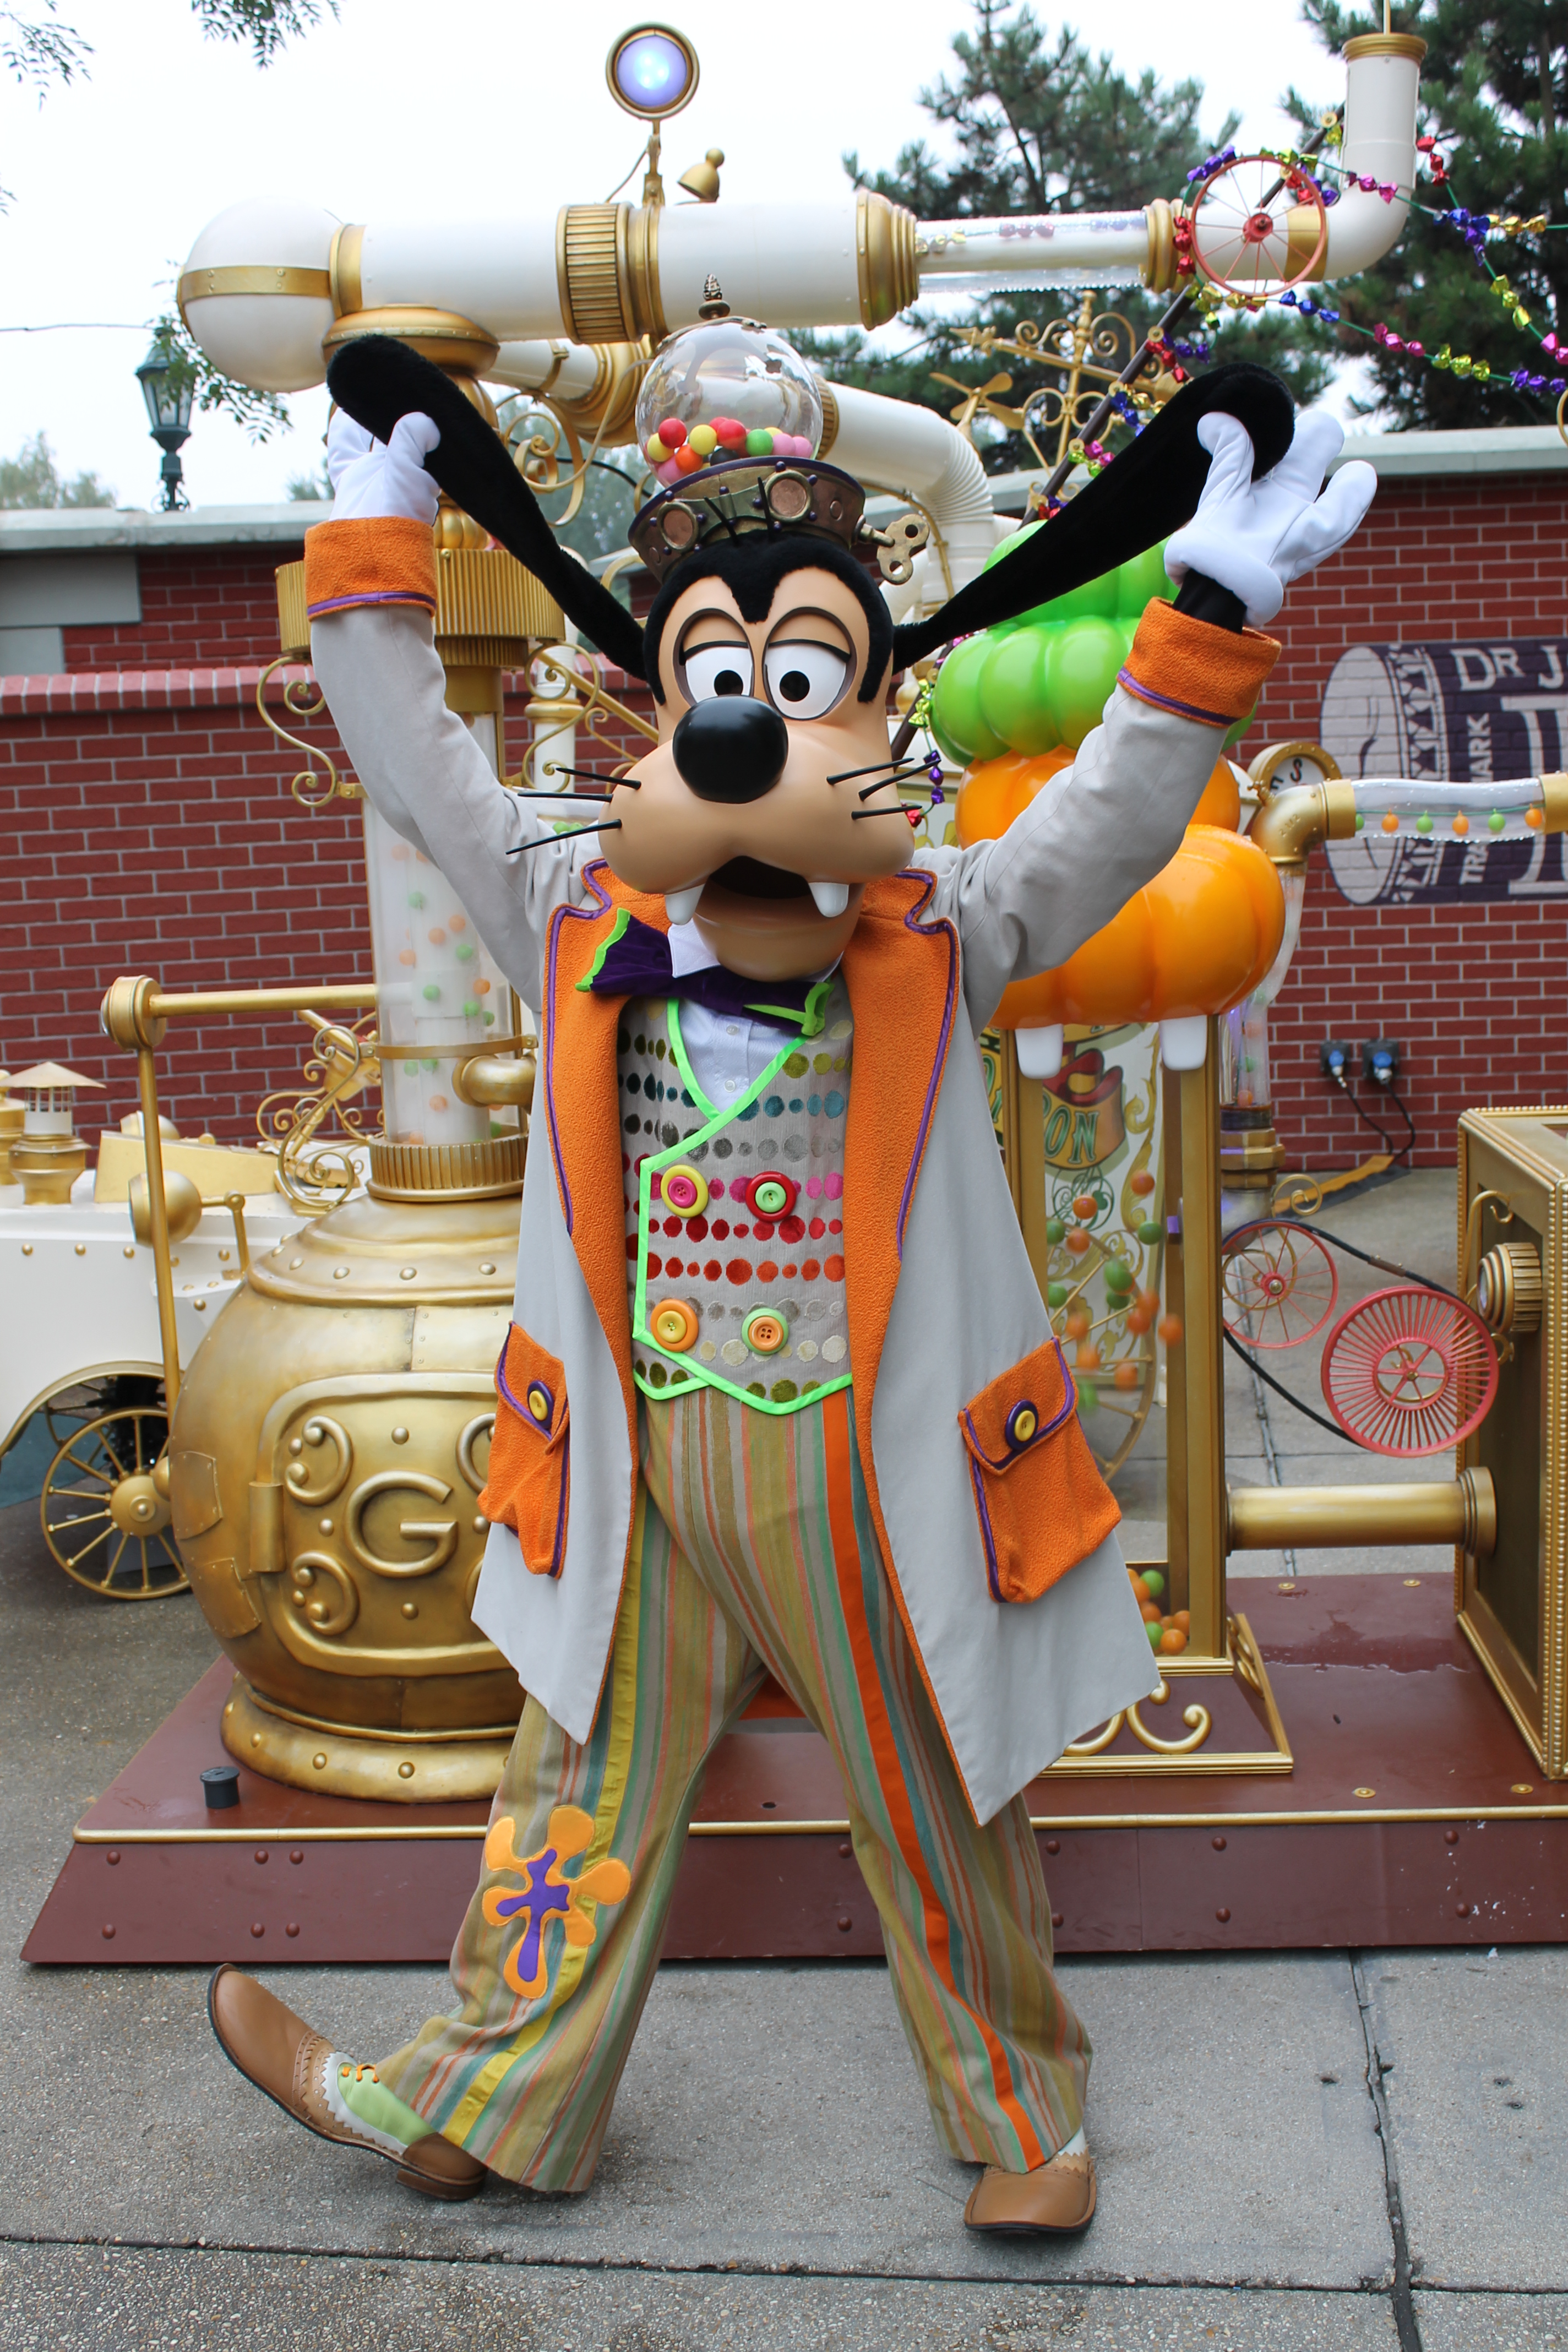 Goofy wearing his brand new Candy outfit. Goofy received this outfit in 2012 when he received a new meet'n'greet location featuring his candy making machine. In 2013 Goofy continued to meet guests at this location.